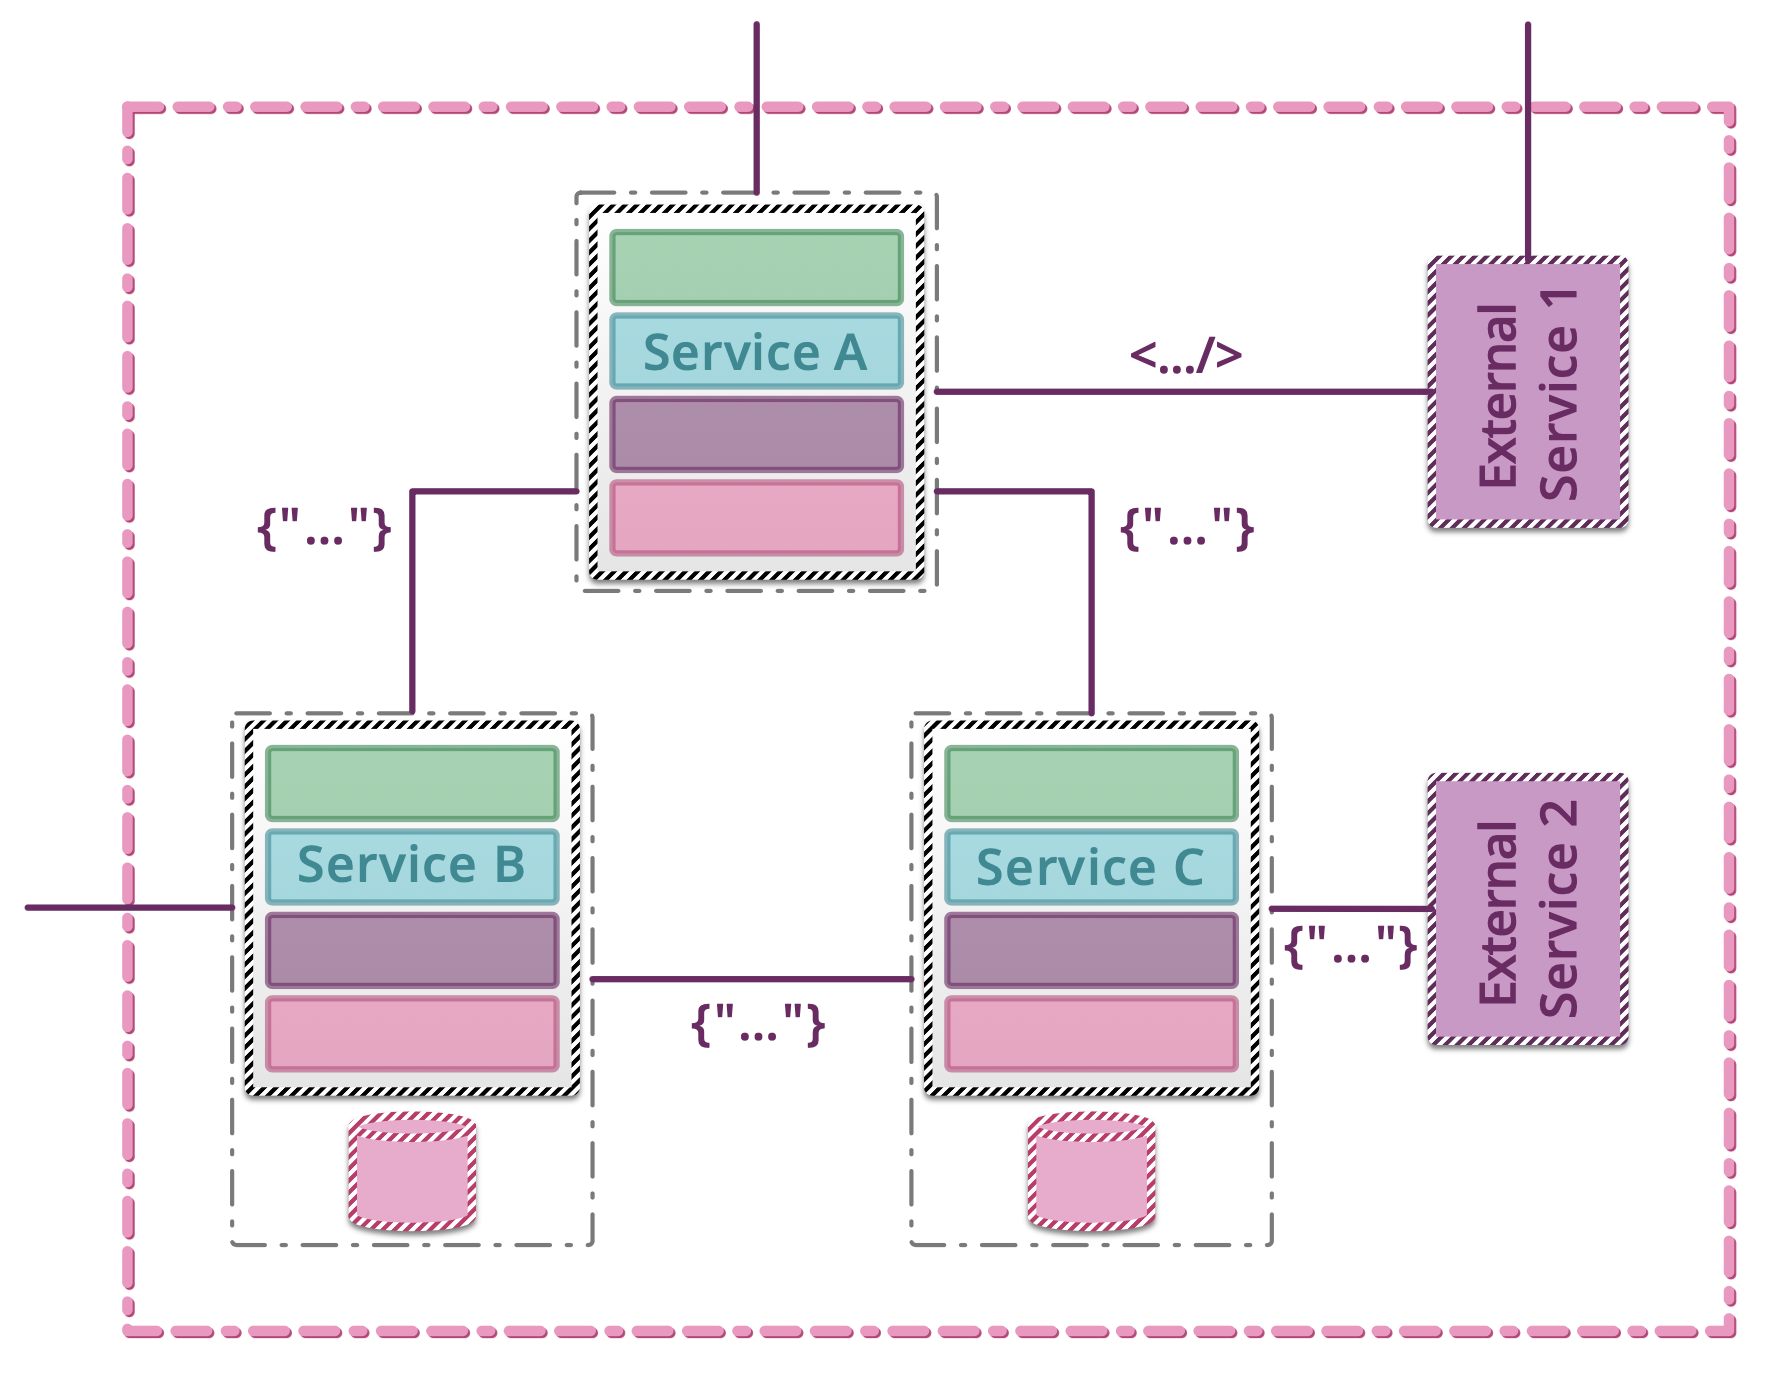 ../../_images/testing-microservices-12.png